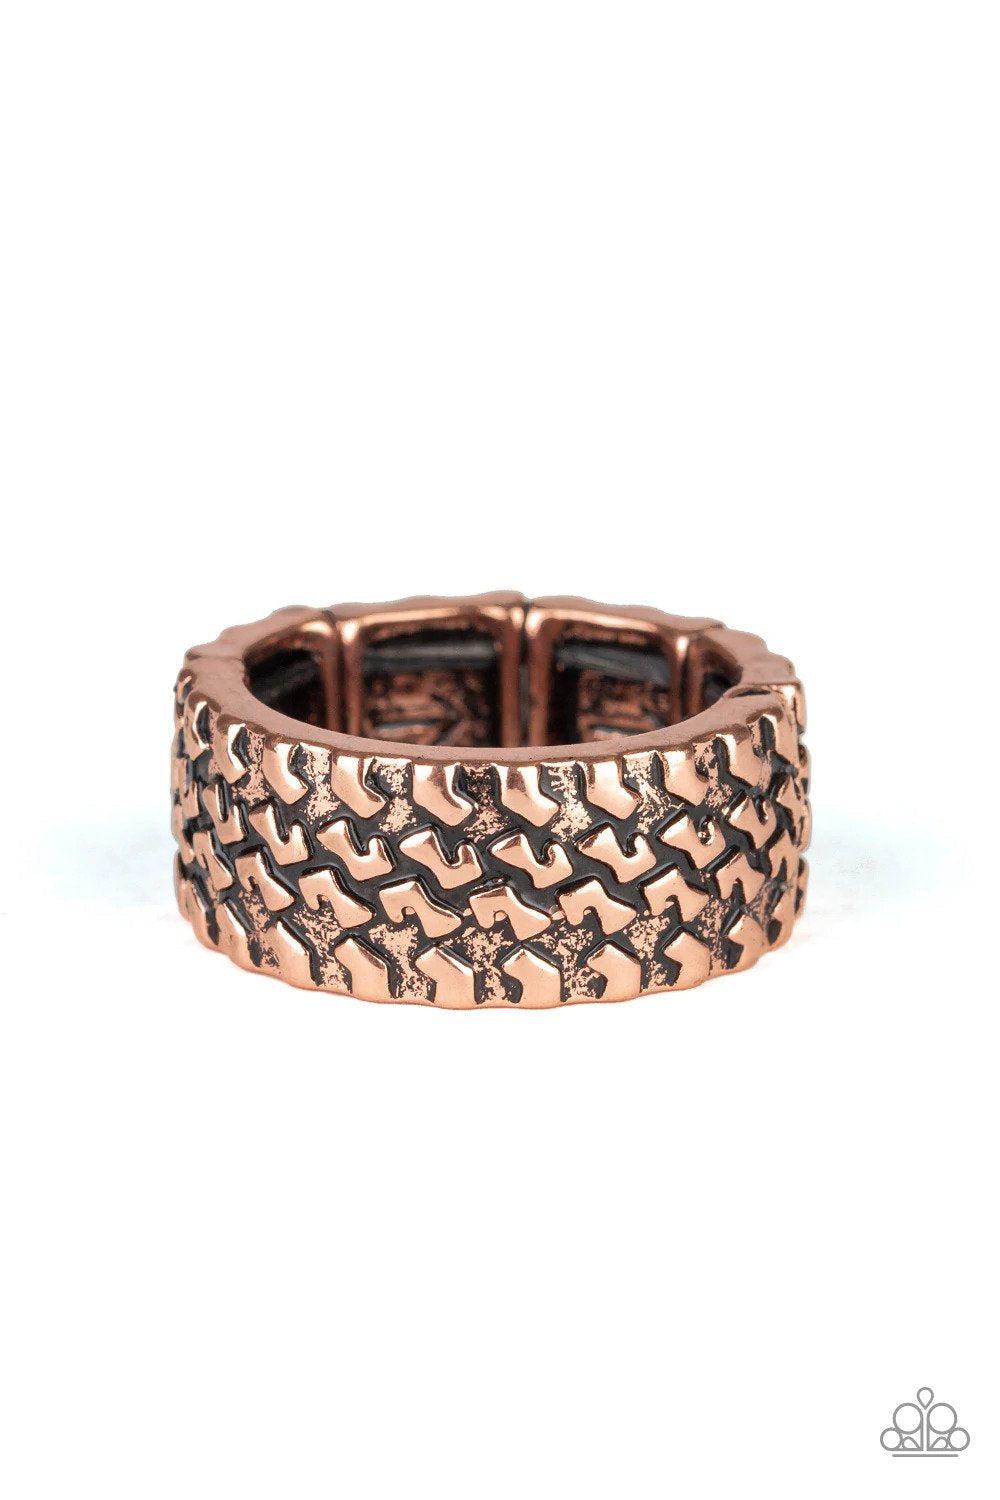 All Wheel Drive Copper Ring - Paparazzi Accessories- lightbox - CarasShop.com - $5 Jewelry by Cara Jewels